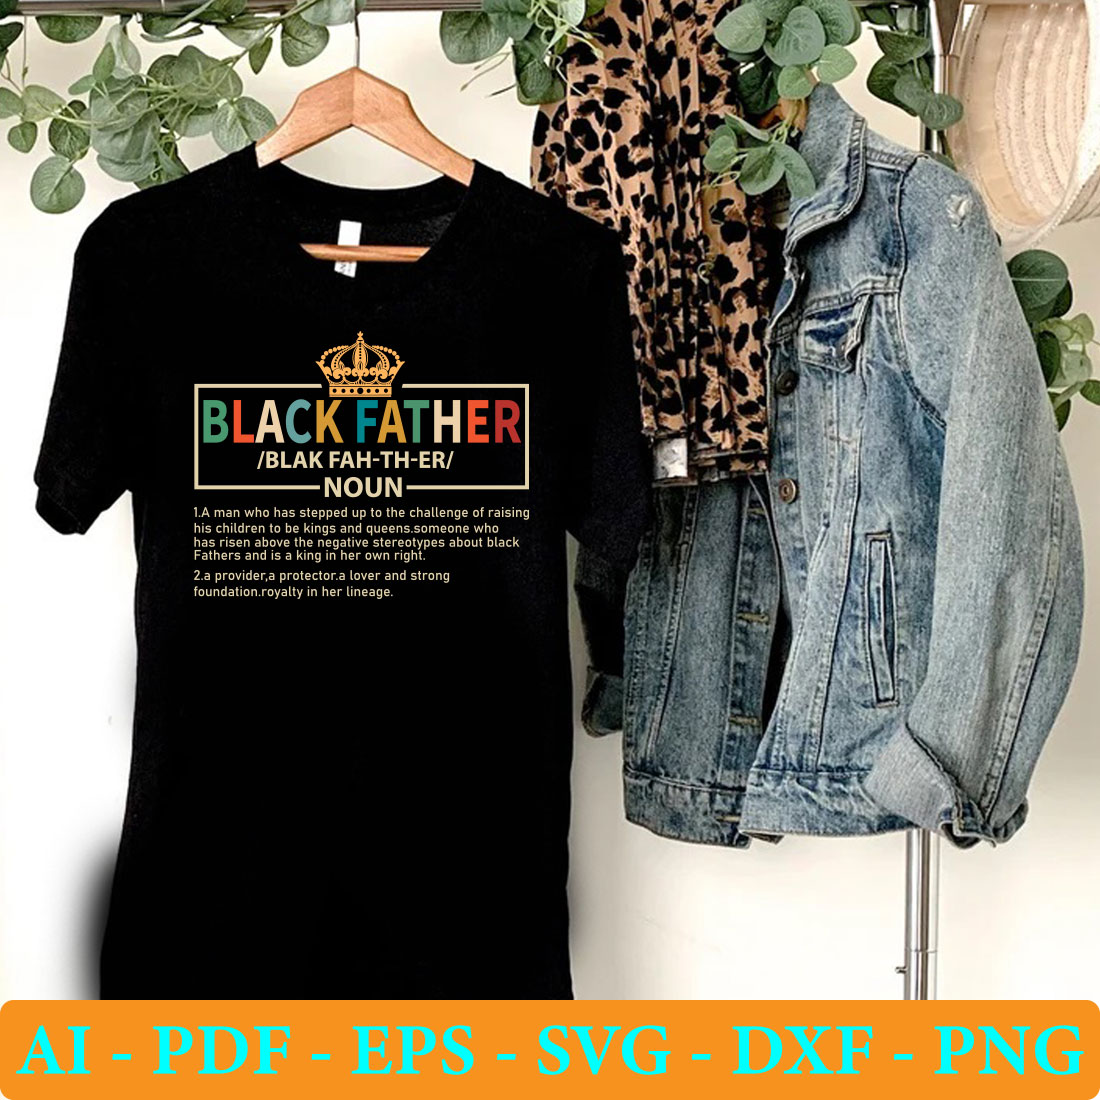 Black father t - shirt hanging on a clothes rack.